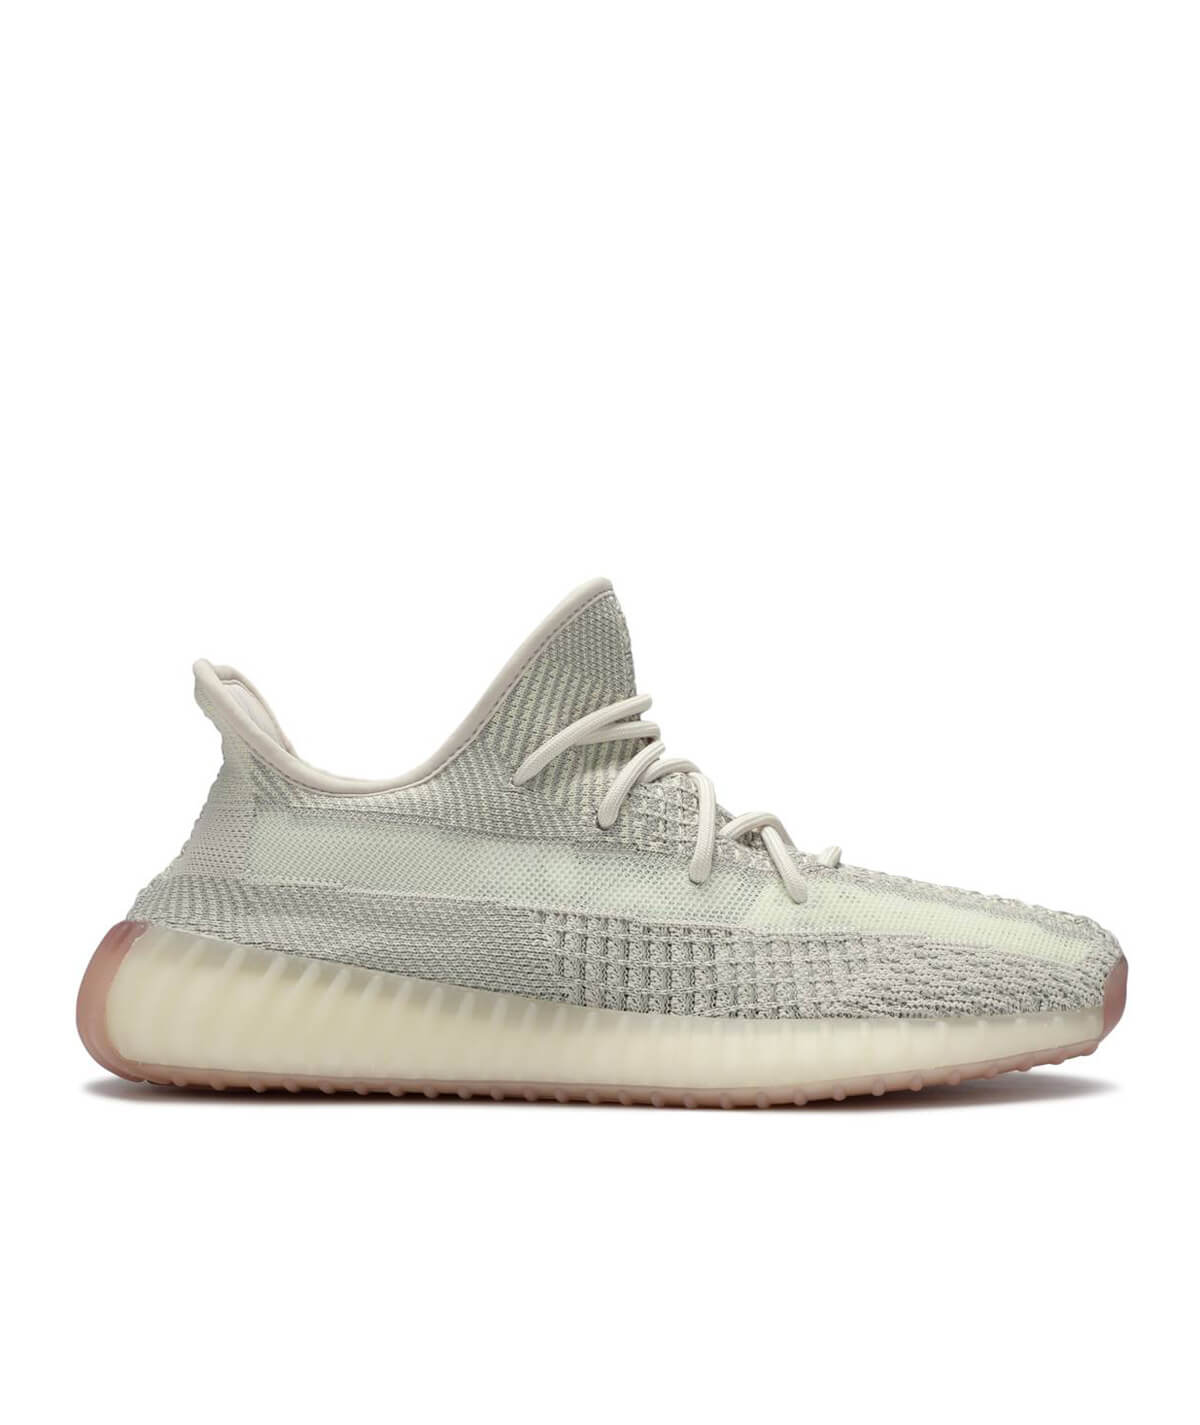 Adidas Yeezy Boost 350 V2 Citrin – Chaptr One